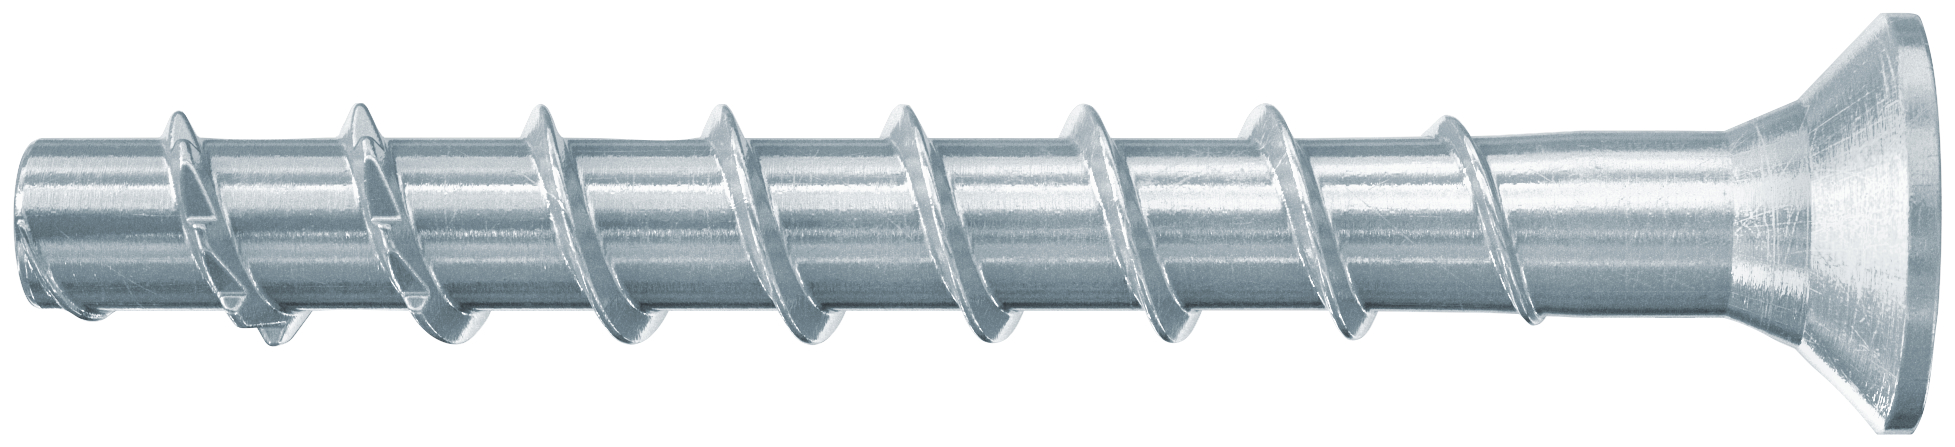 Concrete anchoring screw countersunk type SK Ultracut Carbon steel, hardened Zinc plated